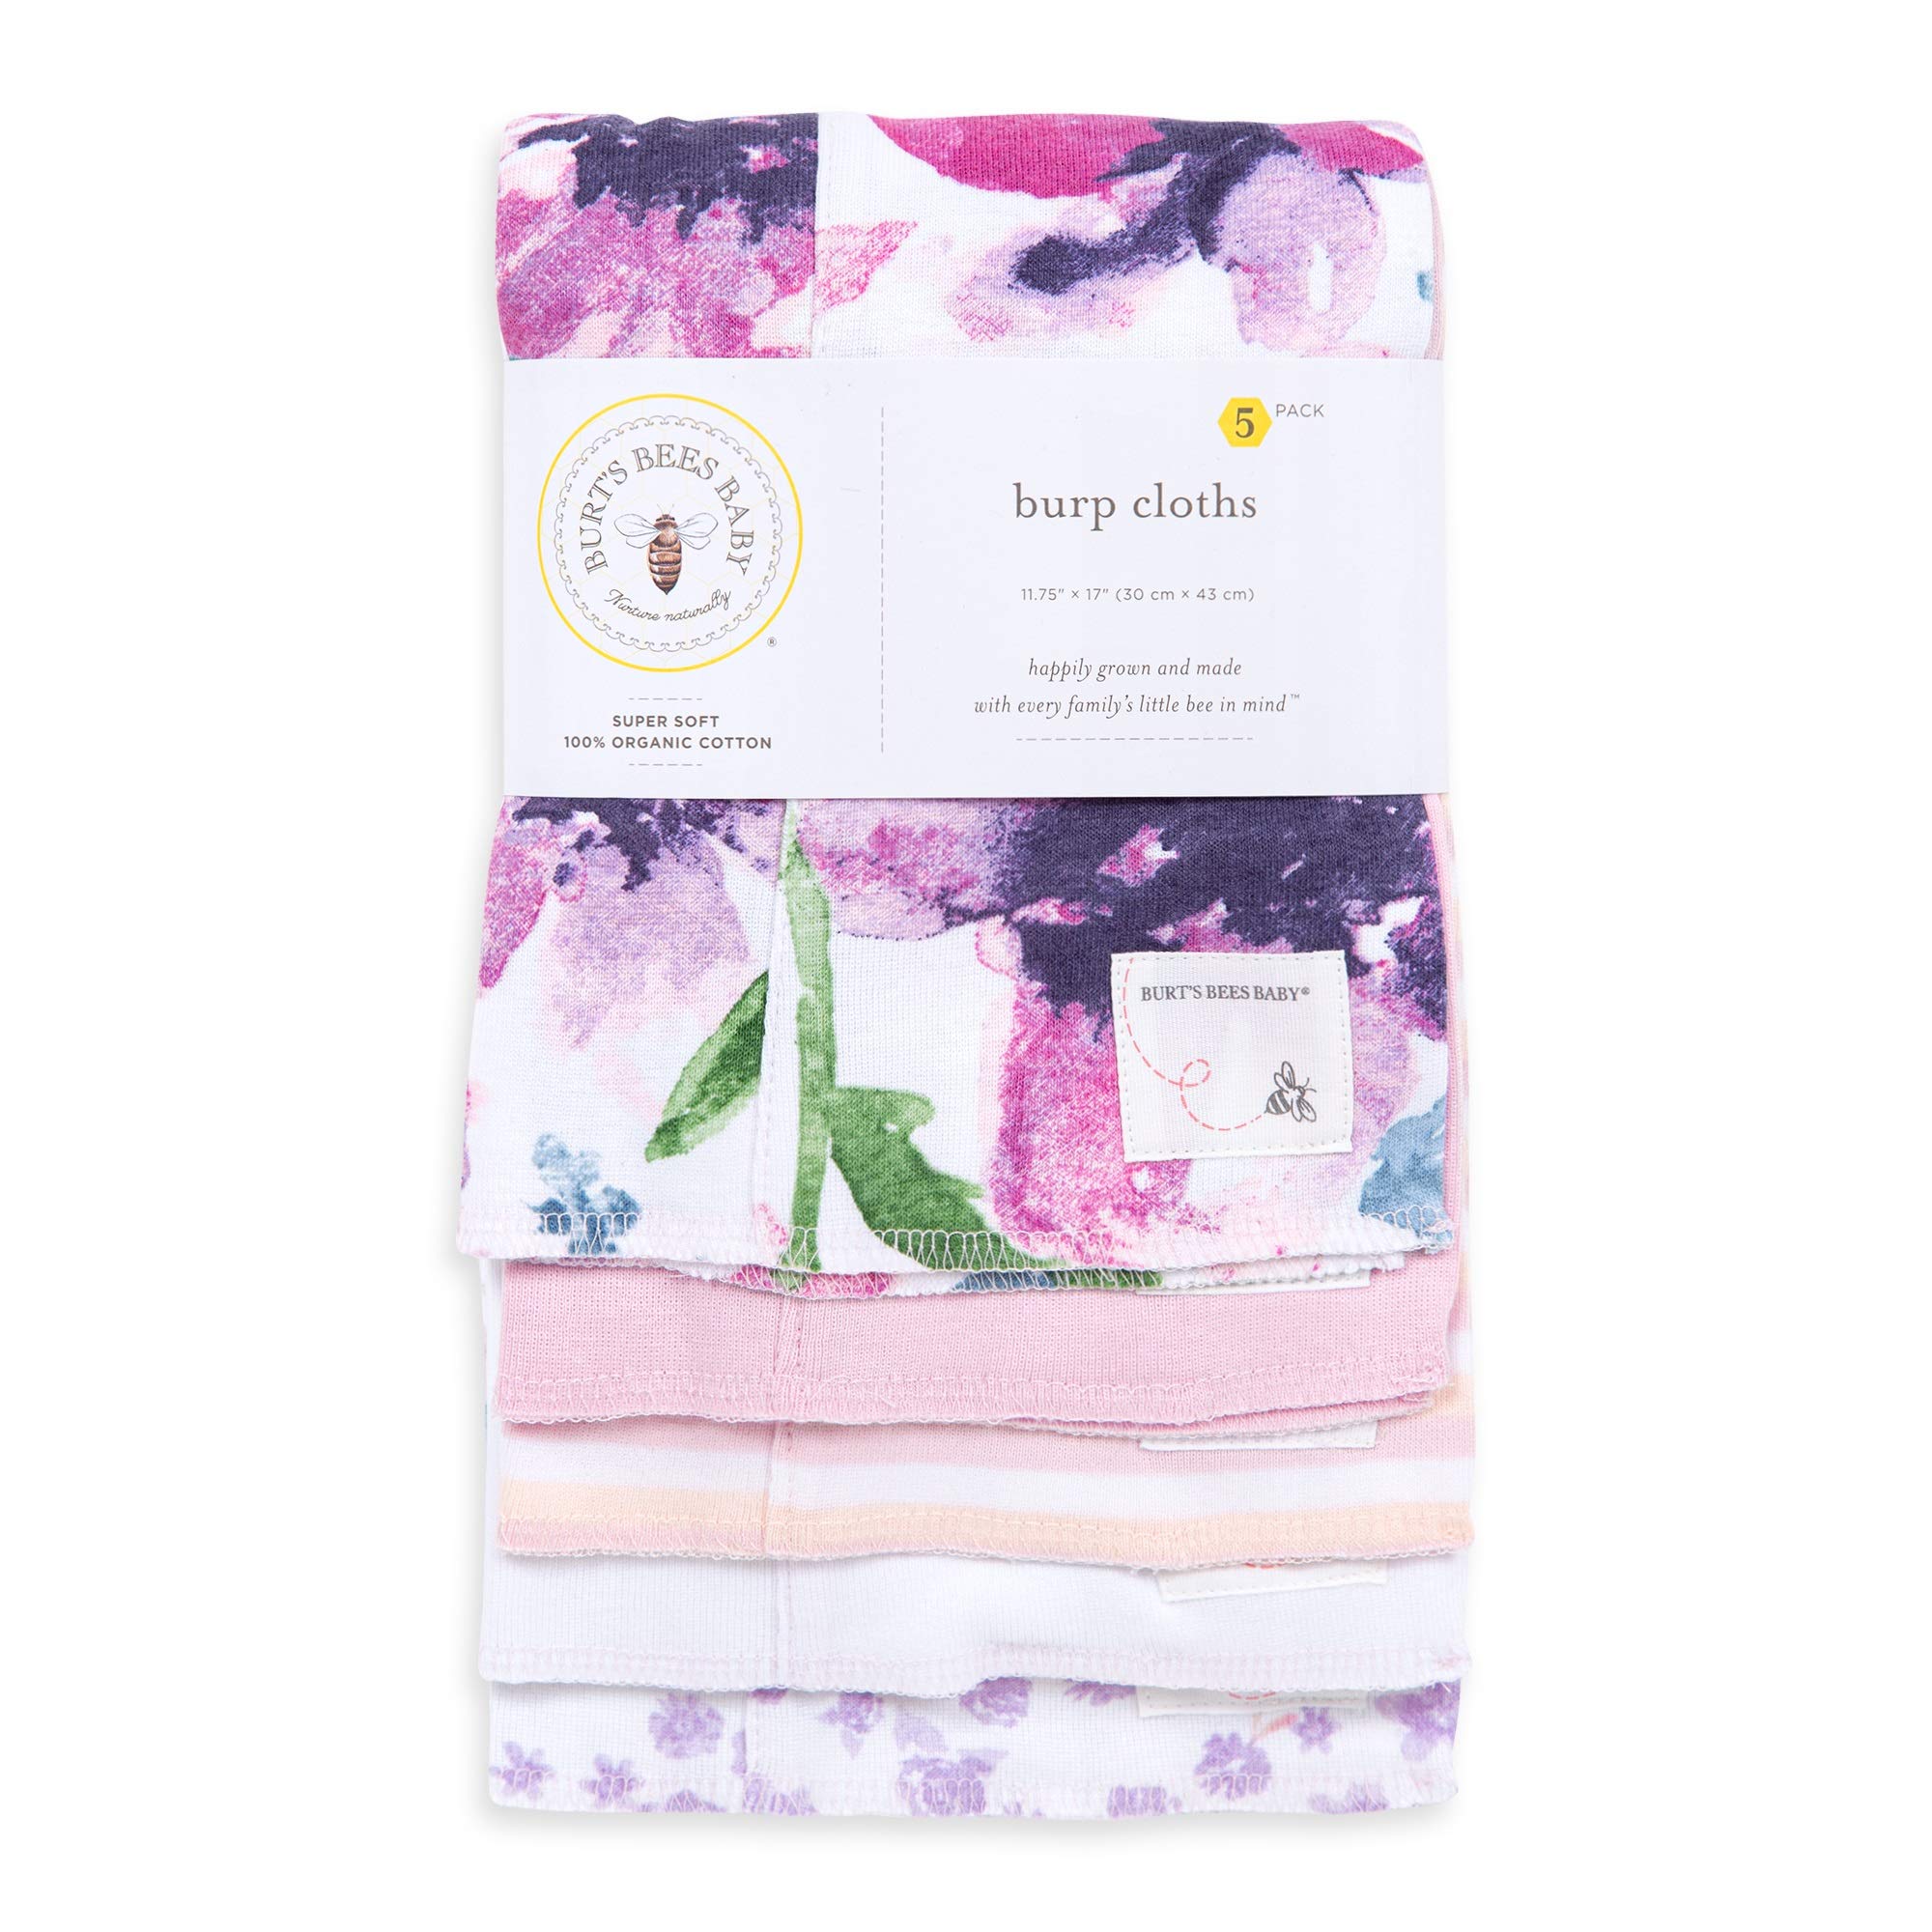 Burt's Bees Baby - Burp Cloths, 5-Pack Extra Absorbent 100% Organic Cotton Burp Cloths (Watercolor Daylily) (LY27007-LLM-OS-H)